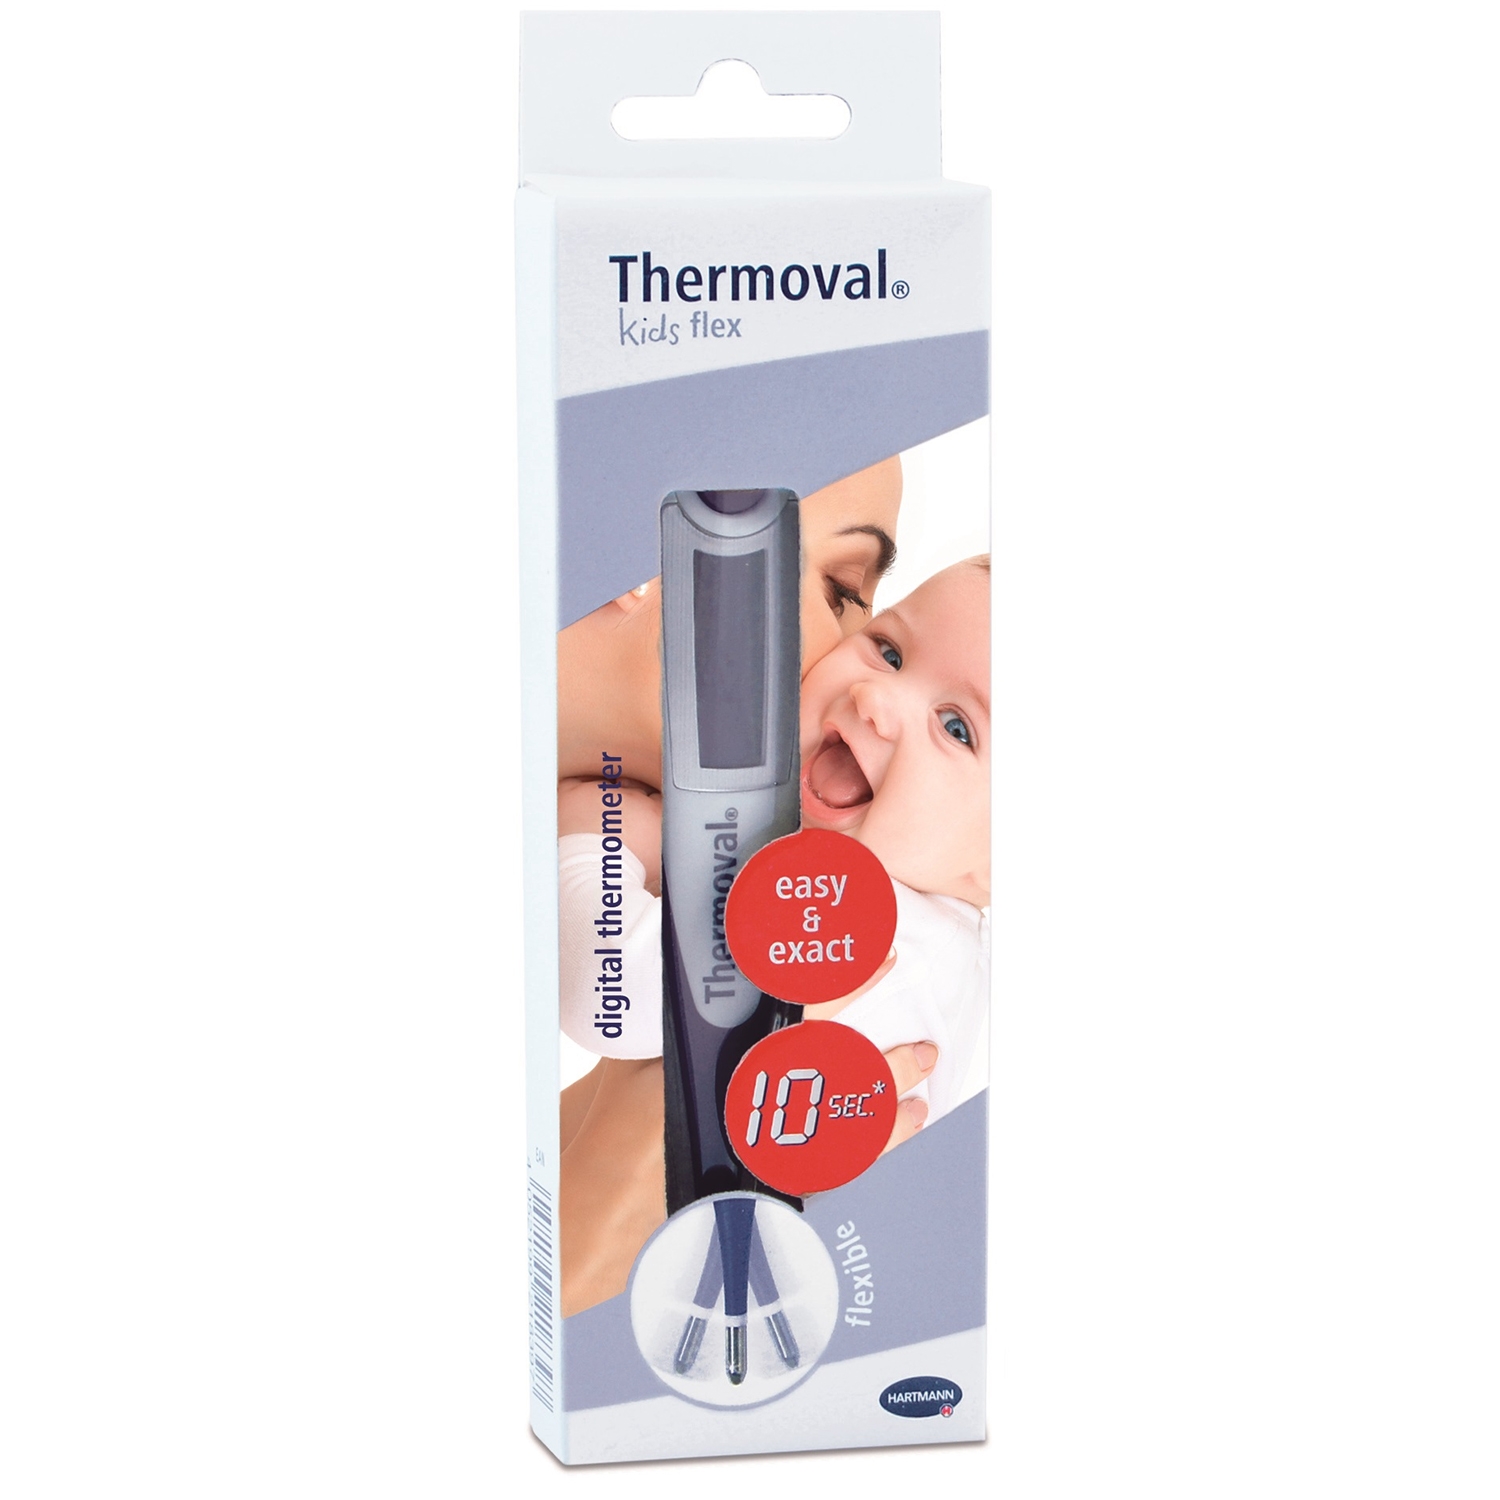 Thermoval kids flex thermometer